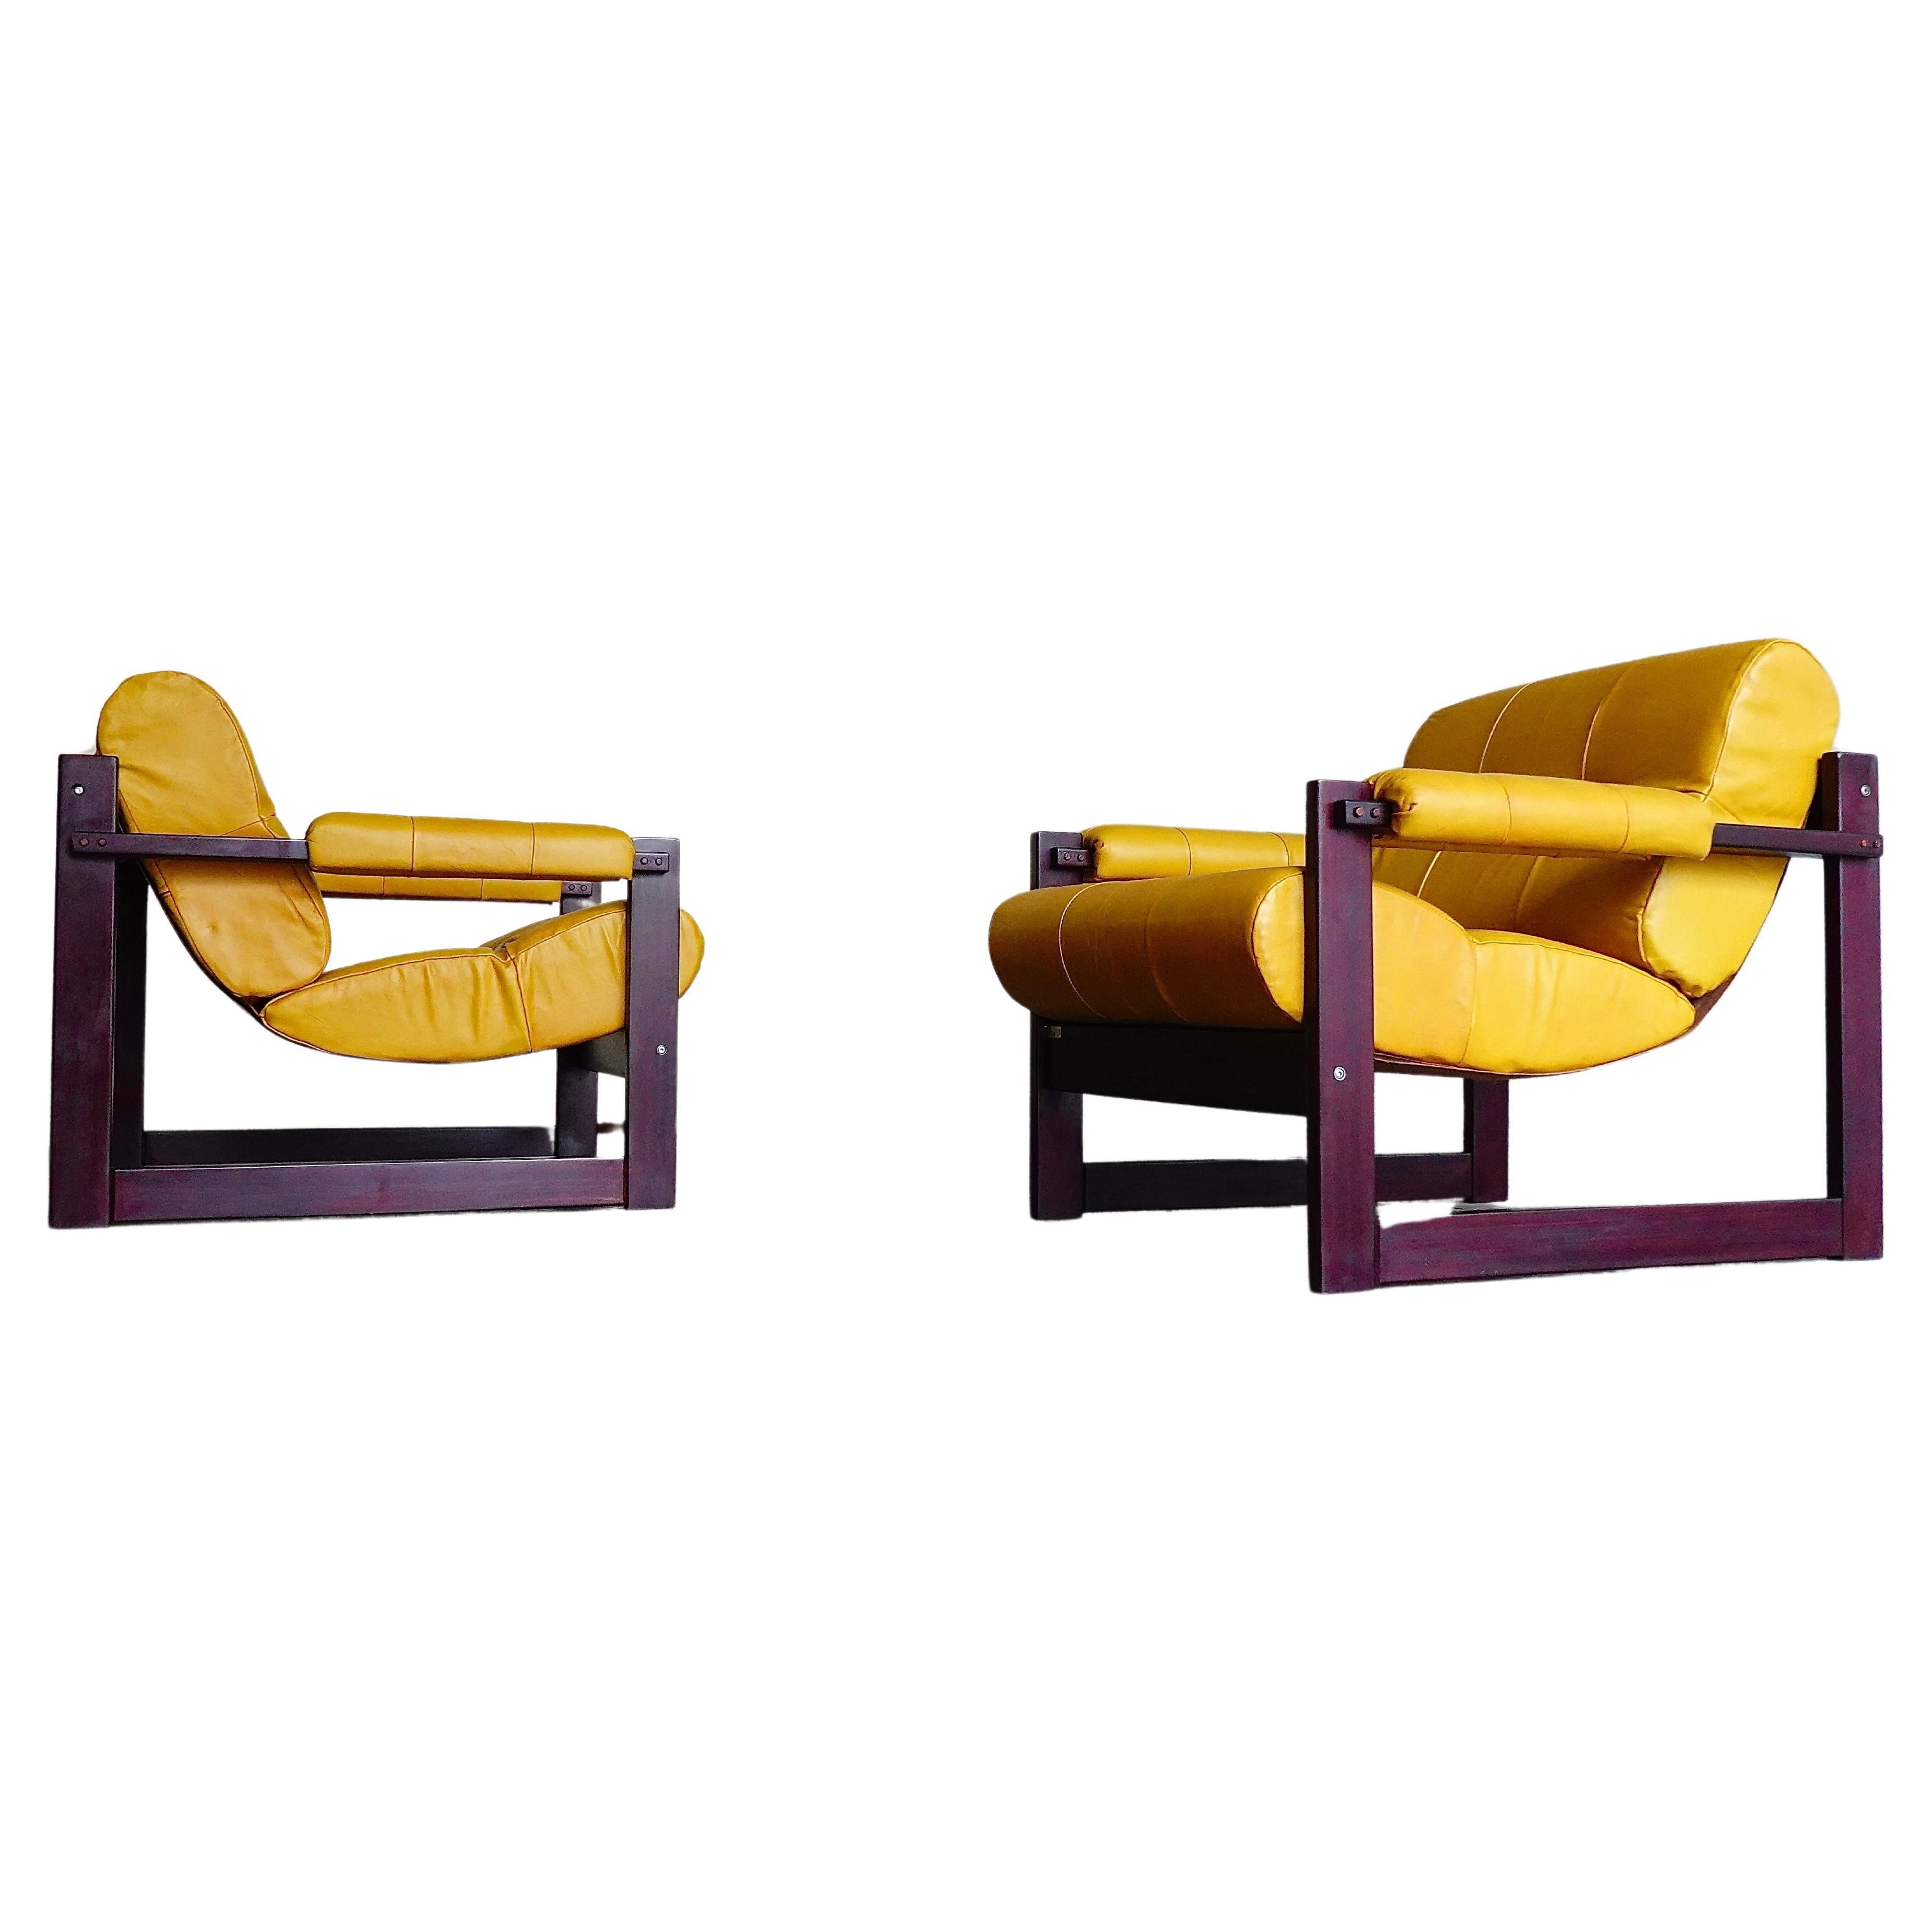 Pr. Percival Lafer MP-167 Lounge Chairs in Jatoba & Leather, 1970s For Sale